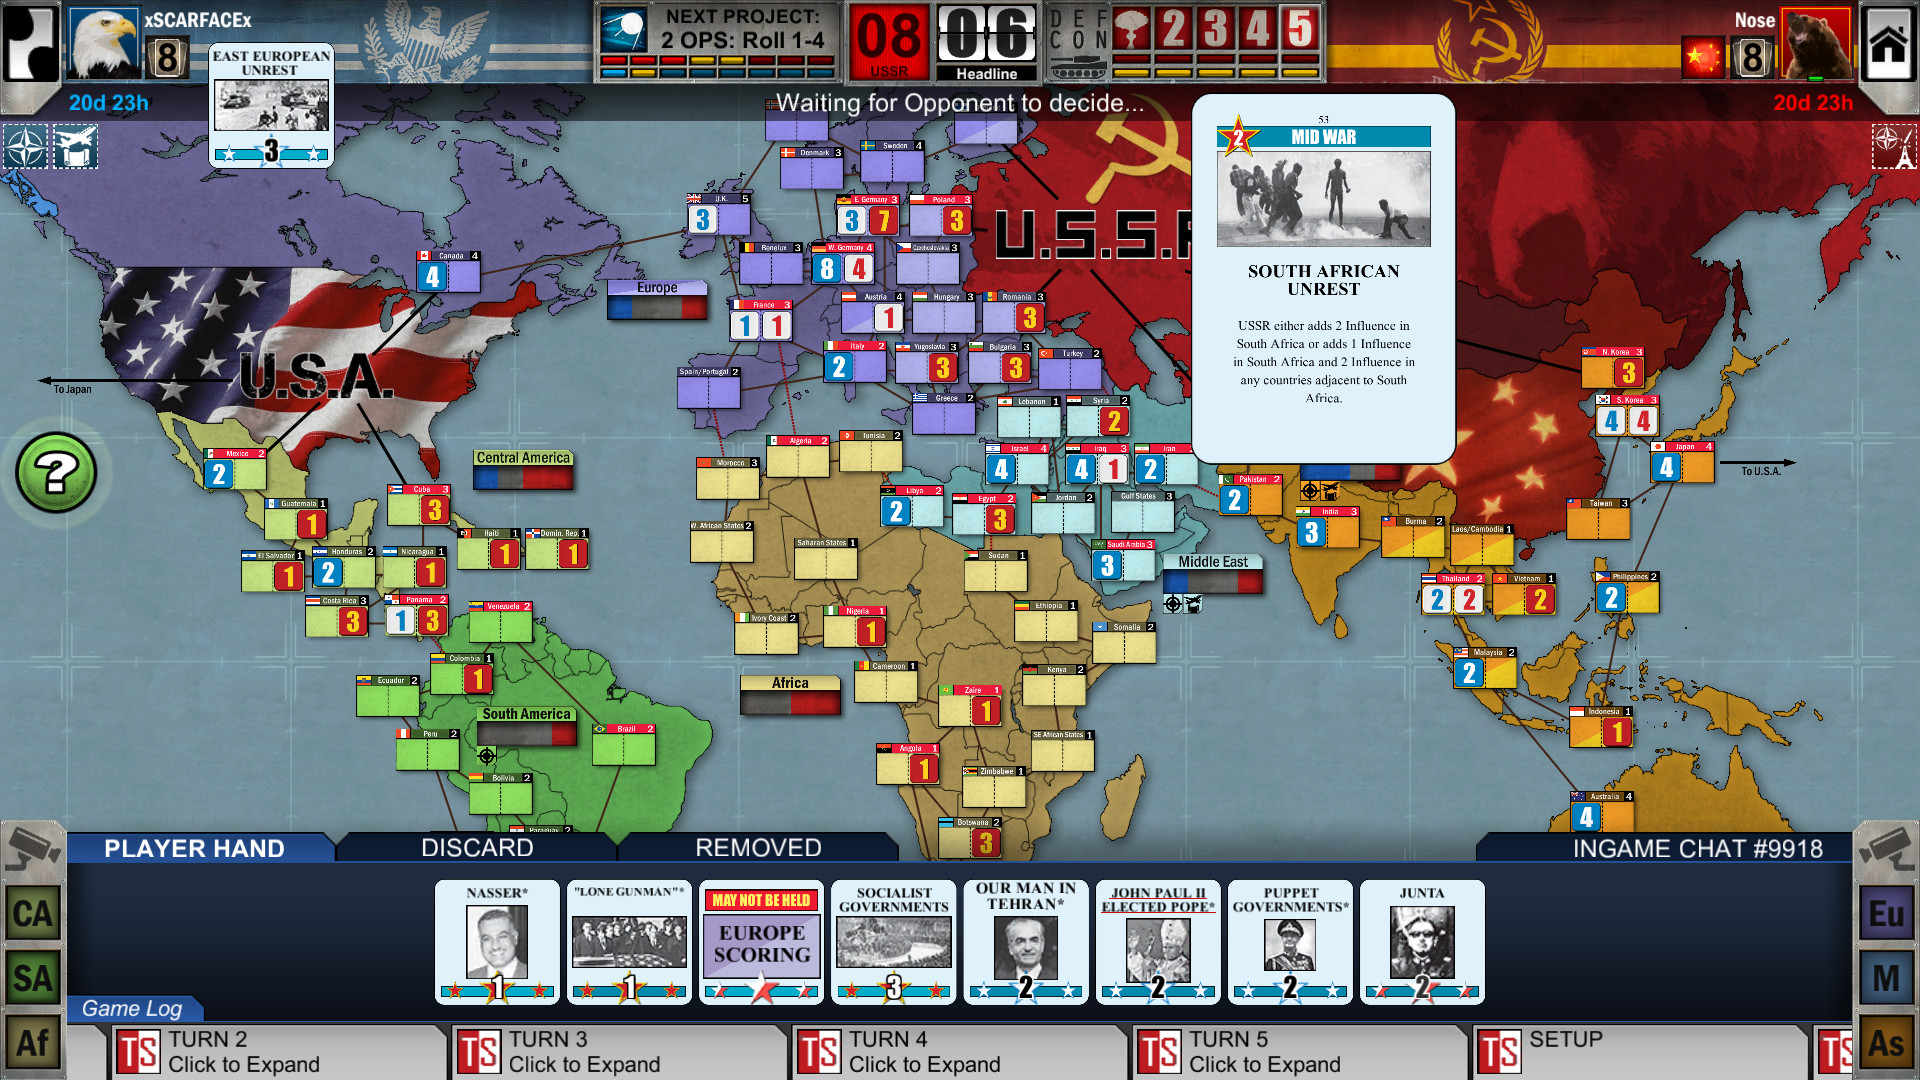 The Best Free PC Games - Foreign Policy